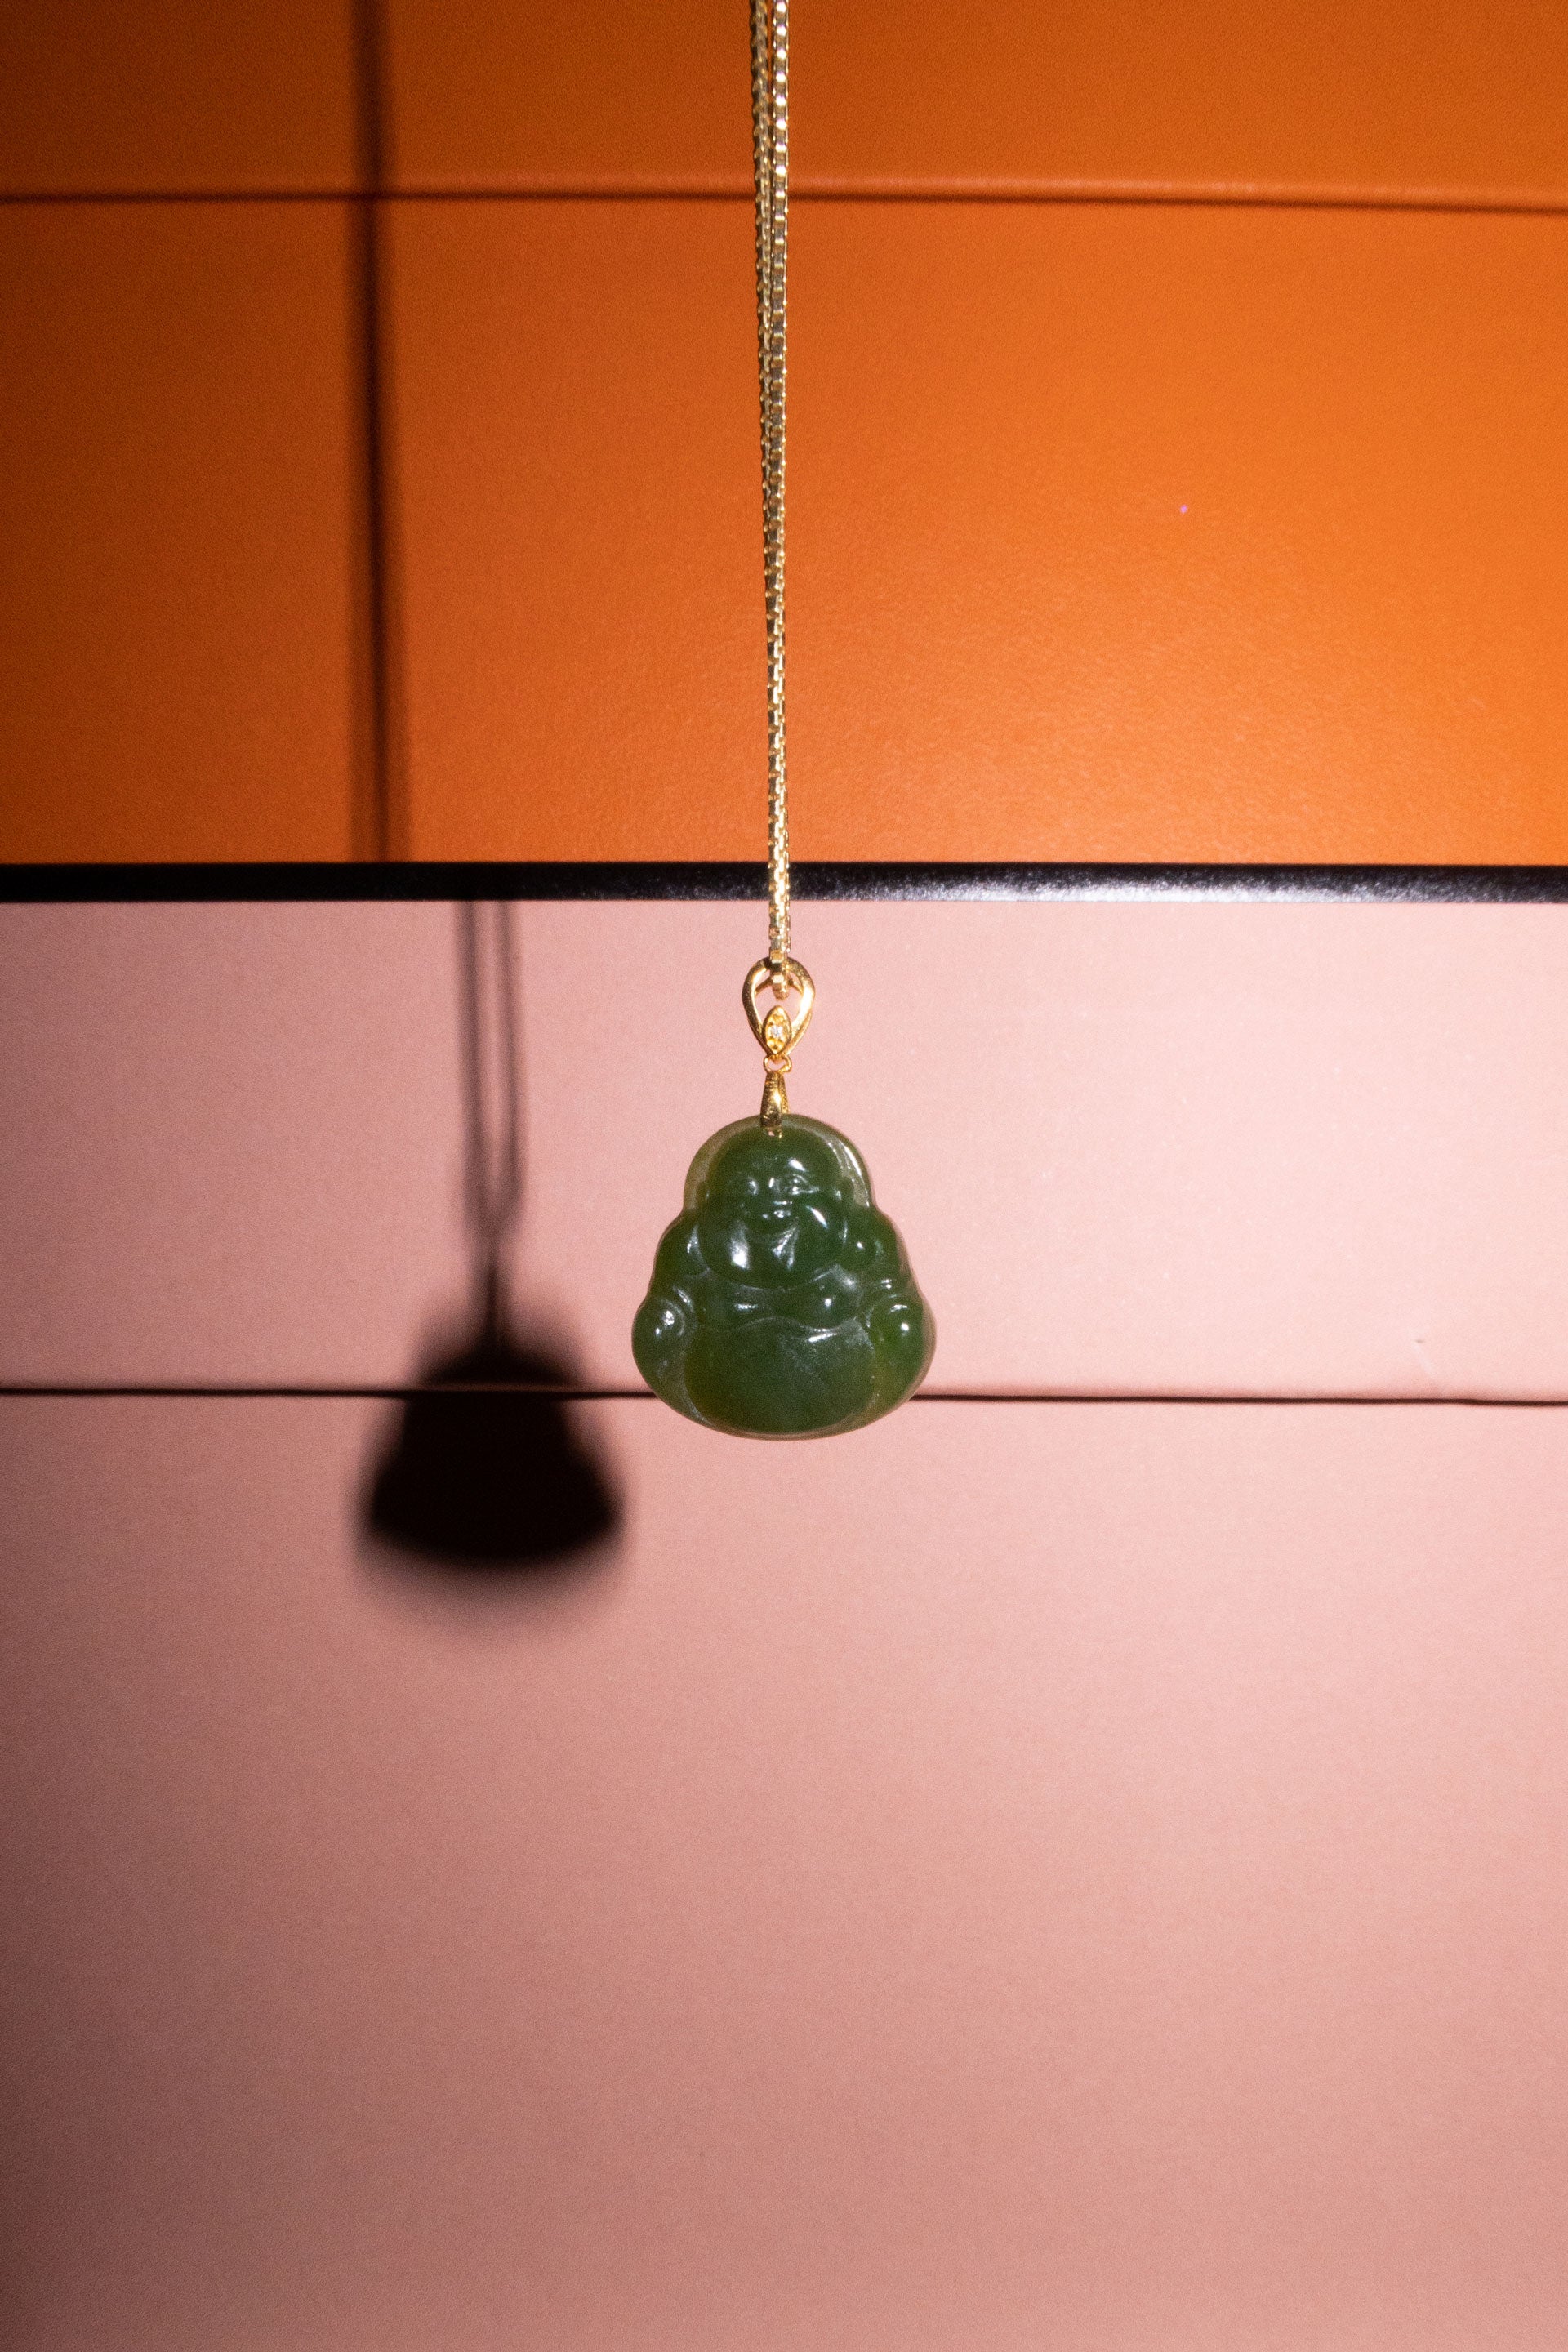 Jade Laughing Buddha Pendant Meaning: The Wisdom of Laughter